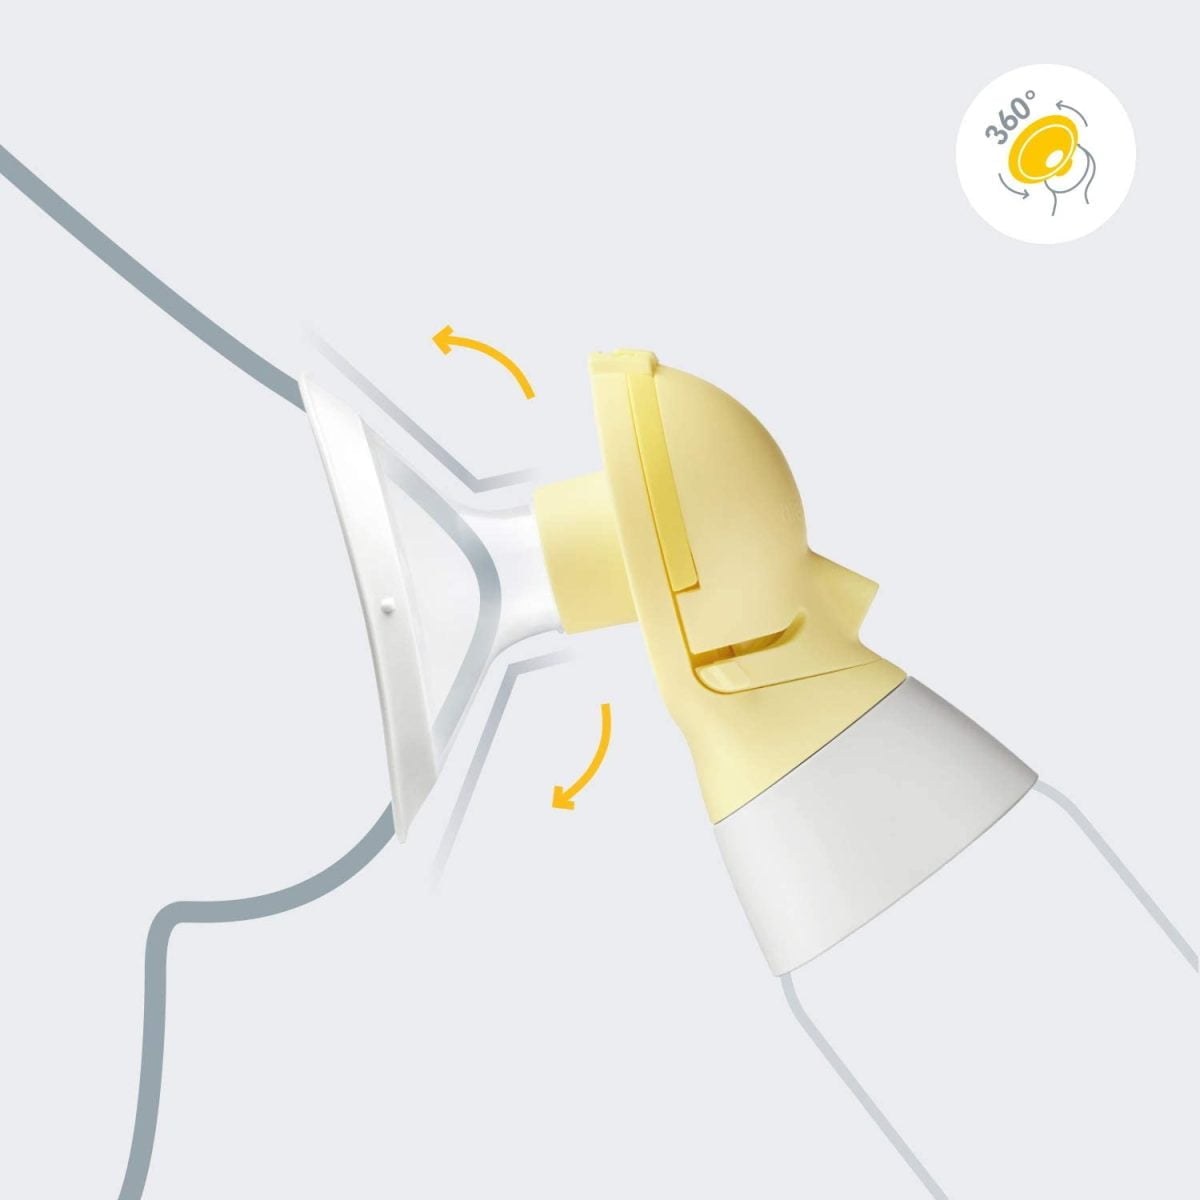 51Abehez Fl. Ac Sl1500 Medela &Lt;H1 Class=&Quot;Mtop0&Quot;&Gt;Medela - Swing Maxi Flex Double Electric Breast Pump&Lt;/H1&Gt; Https://Www.youtube.com/Watch?V=6Jgwy593Of4 The Breast Pump Includes A Soft-Touch, Ergonomic Swivel Handle - To Utilise Our Research-Based, Patented 2-Phase Expression Technology. Through Research, Medela Has Learned That There Are Two Distinct Phases Of How Babies Breastfeed. The First Phase, Known As The Stimulation Phase Is When The Baby First Goes To The Breast And Sucks Fast To Initiate The Milk Flow. The Second Phase Of Expression Occurs After Milk Flow Or Let-Down Begins. During This Phase, The Baby Breastfeeds At A Slower Suck Rate For Continued Milk Flow. At Medela, We Integrated This Natural Sucking Behaviour Into Our Breast Pumps To Create Harmony The First Manual Breast Pump To Offer 2-Phase Expression Technology. Harmony'S Single Vacuum Manual Settings Are Easy To Adjust, Making The Pumping Experience Convenient And More Comfortable. Mothers Have The Flexibility To Switch Between The Modes By Adjusting The Handle. This Is The Key To Efficient Breast Pumping And A Major Reason Why Medela Is The Leading Breast Pump Recommended By Doctors For New Mothers. Mothers Can Significantly Reduce The Time Taken To Express Because The Milk Flows Faster And More Easily. &Lt;Pre&Gt;&Lt;B&Gt;We Also Provide International Wholesale And Retail Shipping To All Gcc Countries: Saudi Arabia, Qatar, Oman, Kuwait, Bahrain. Warranty: Pump - 1 Year, Battery - 6 Months&Lt;/B&Gt;&Lt;/Pre&Gt; Breast Pump Medela Swing Maxi Flex Double Electric Breast Pump